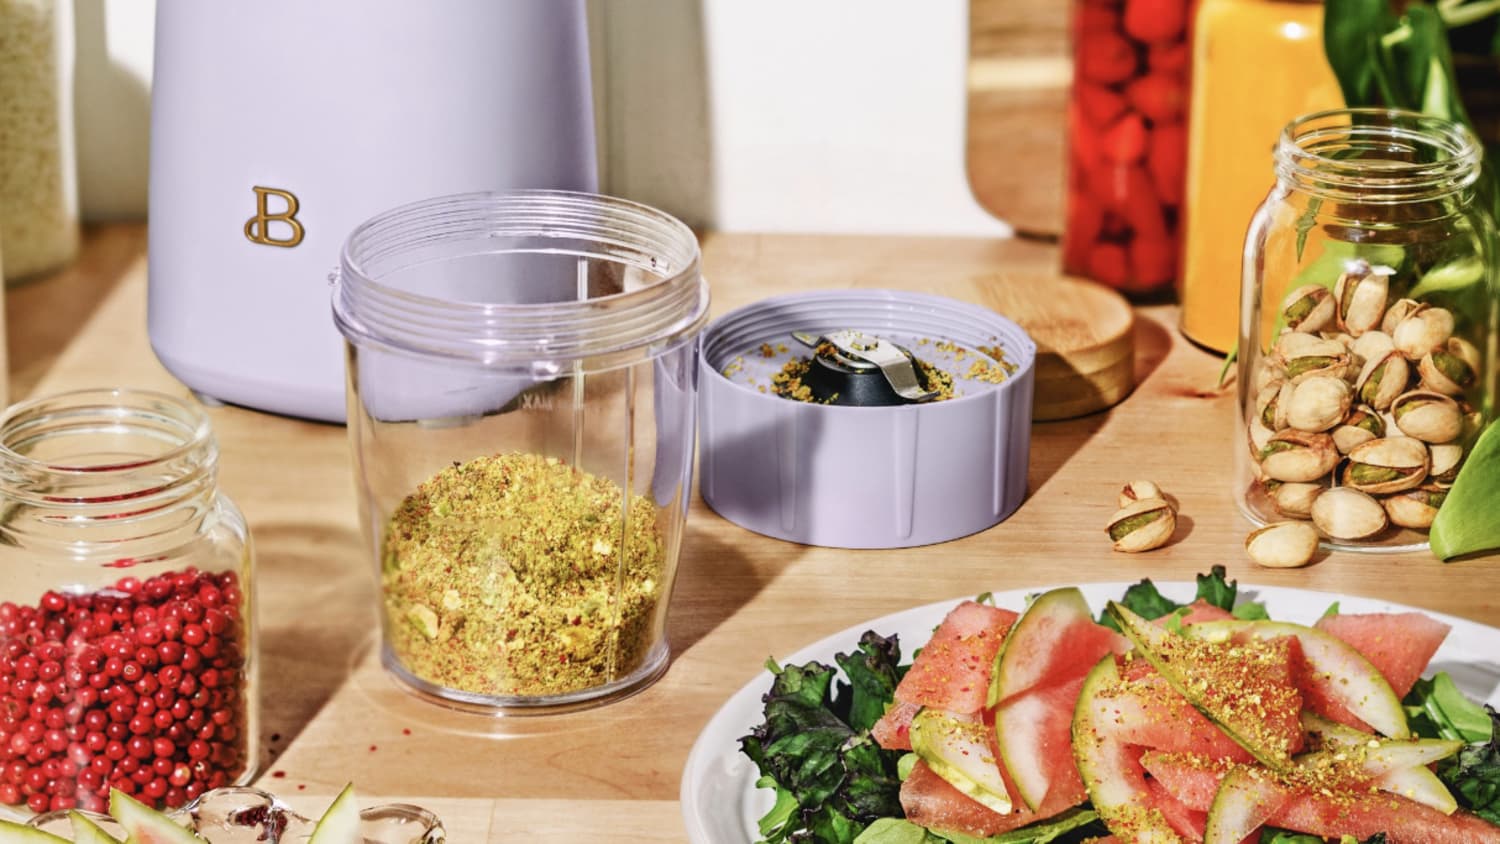 Drew Barrymore's Kitchen Collection Just Restocked at Walmart